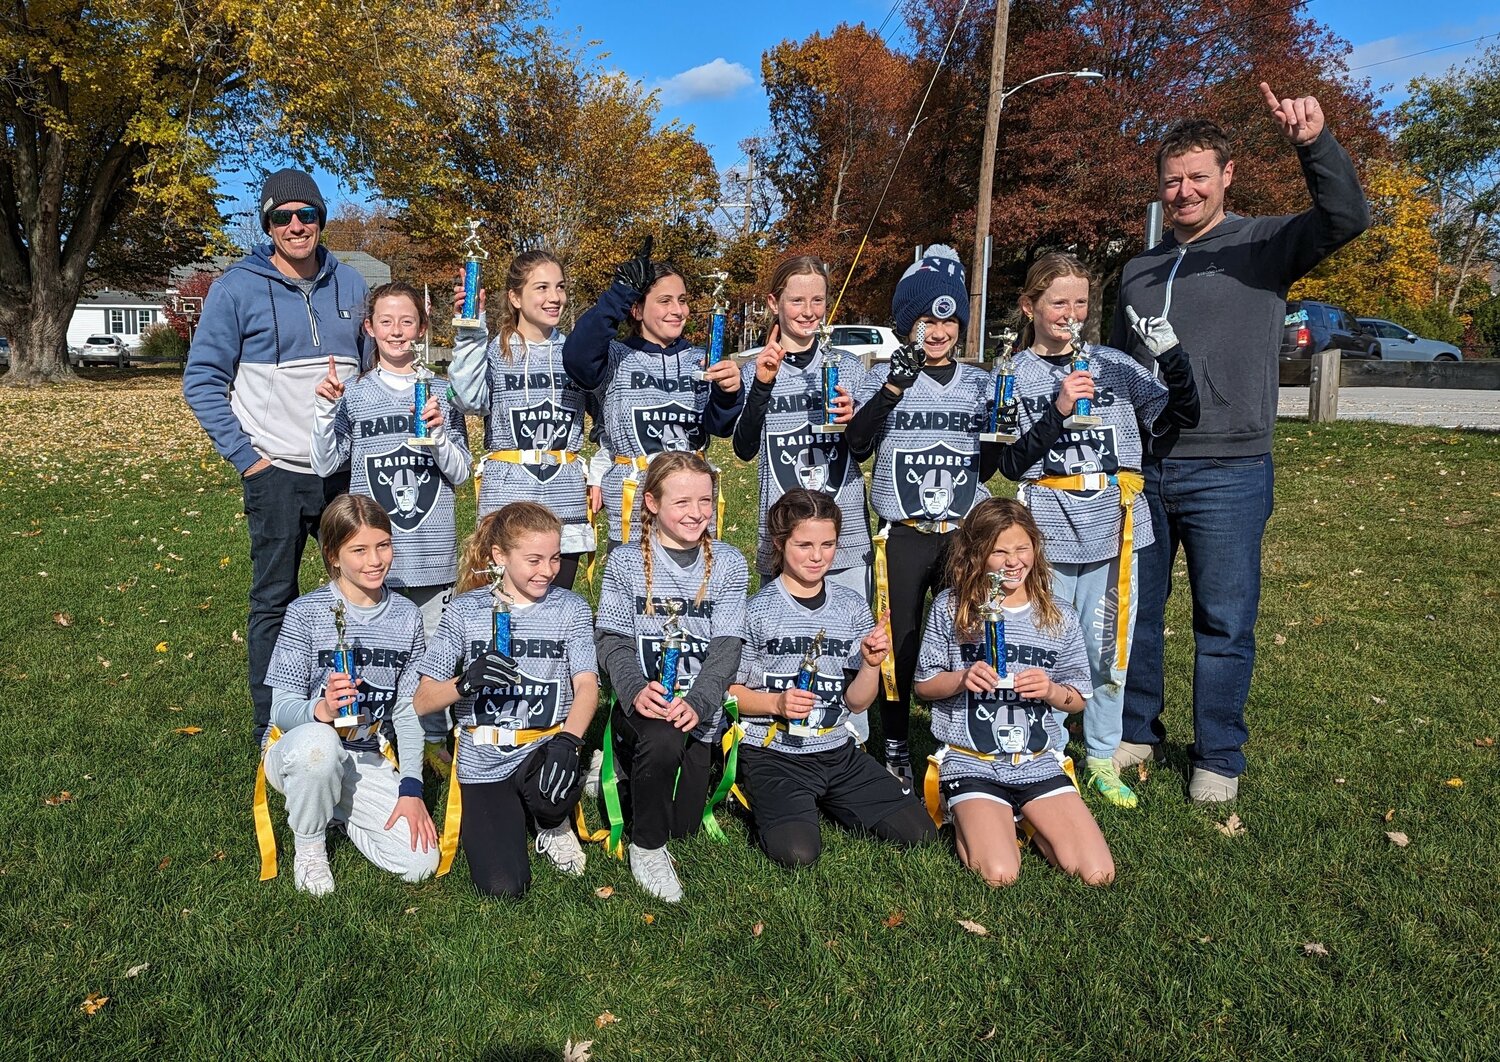 Members of the Raiders celebrated after winning the 10U Division Championship.